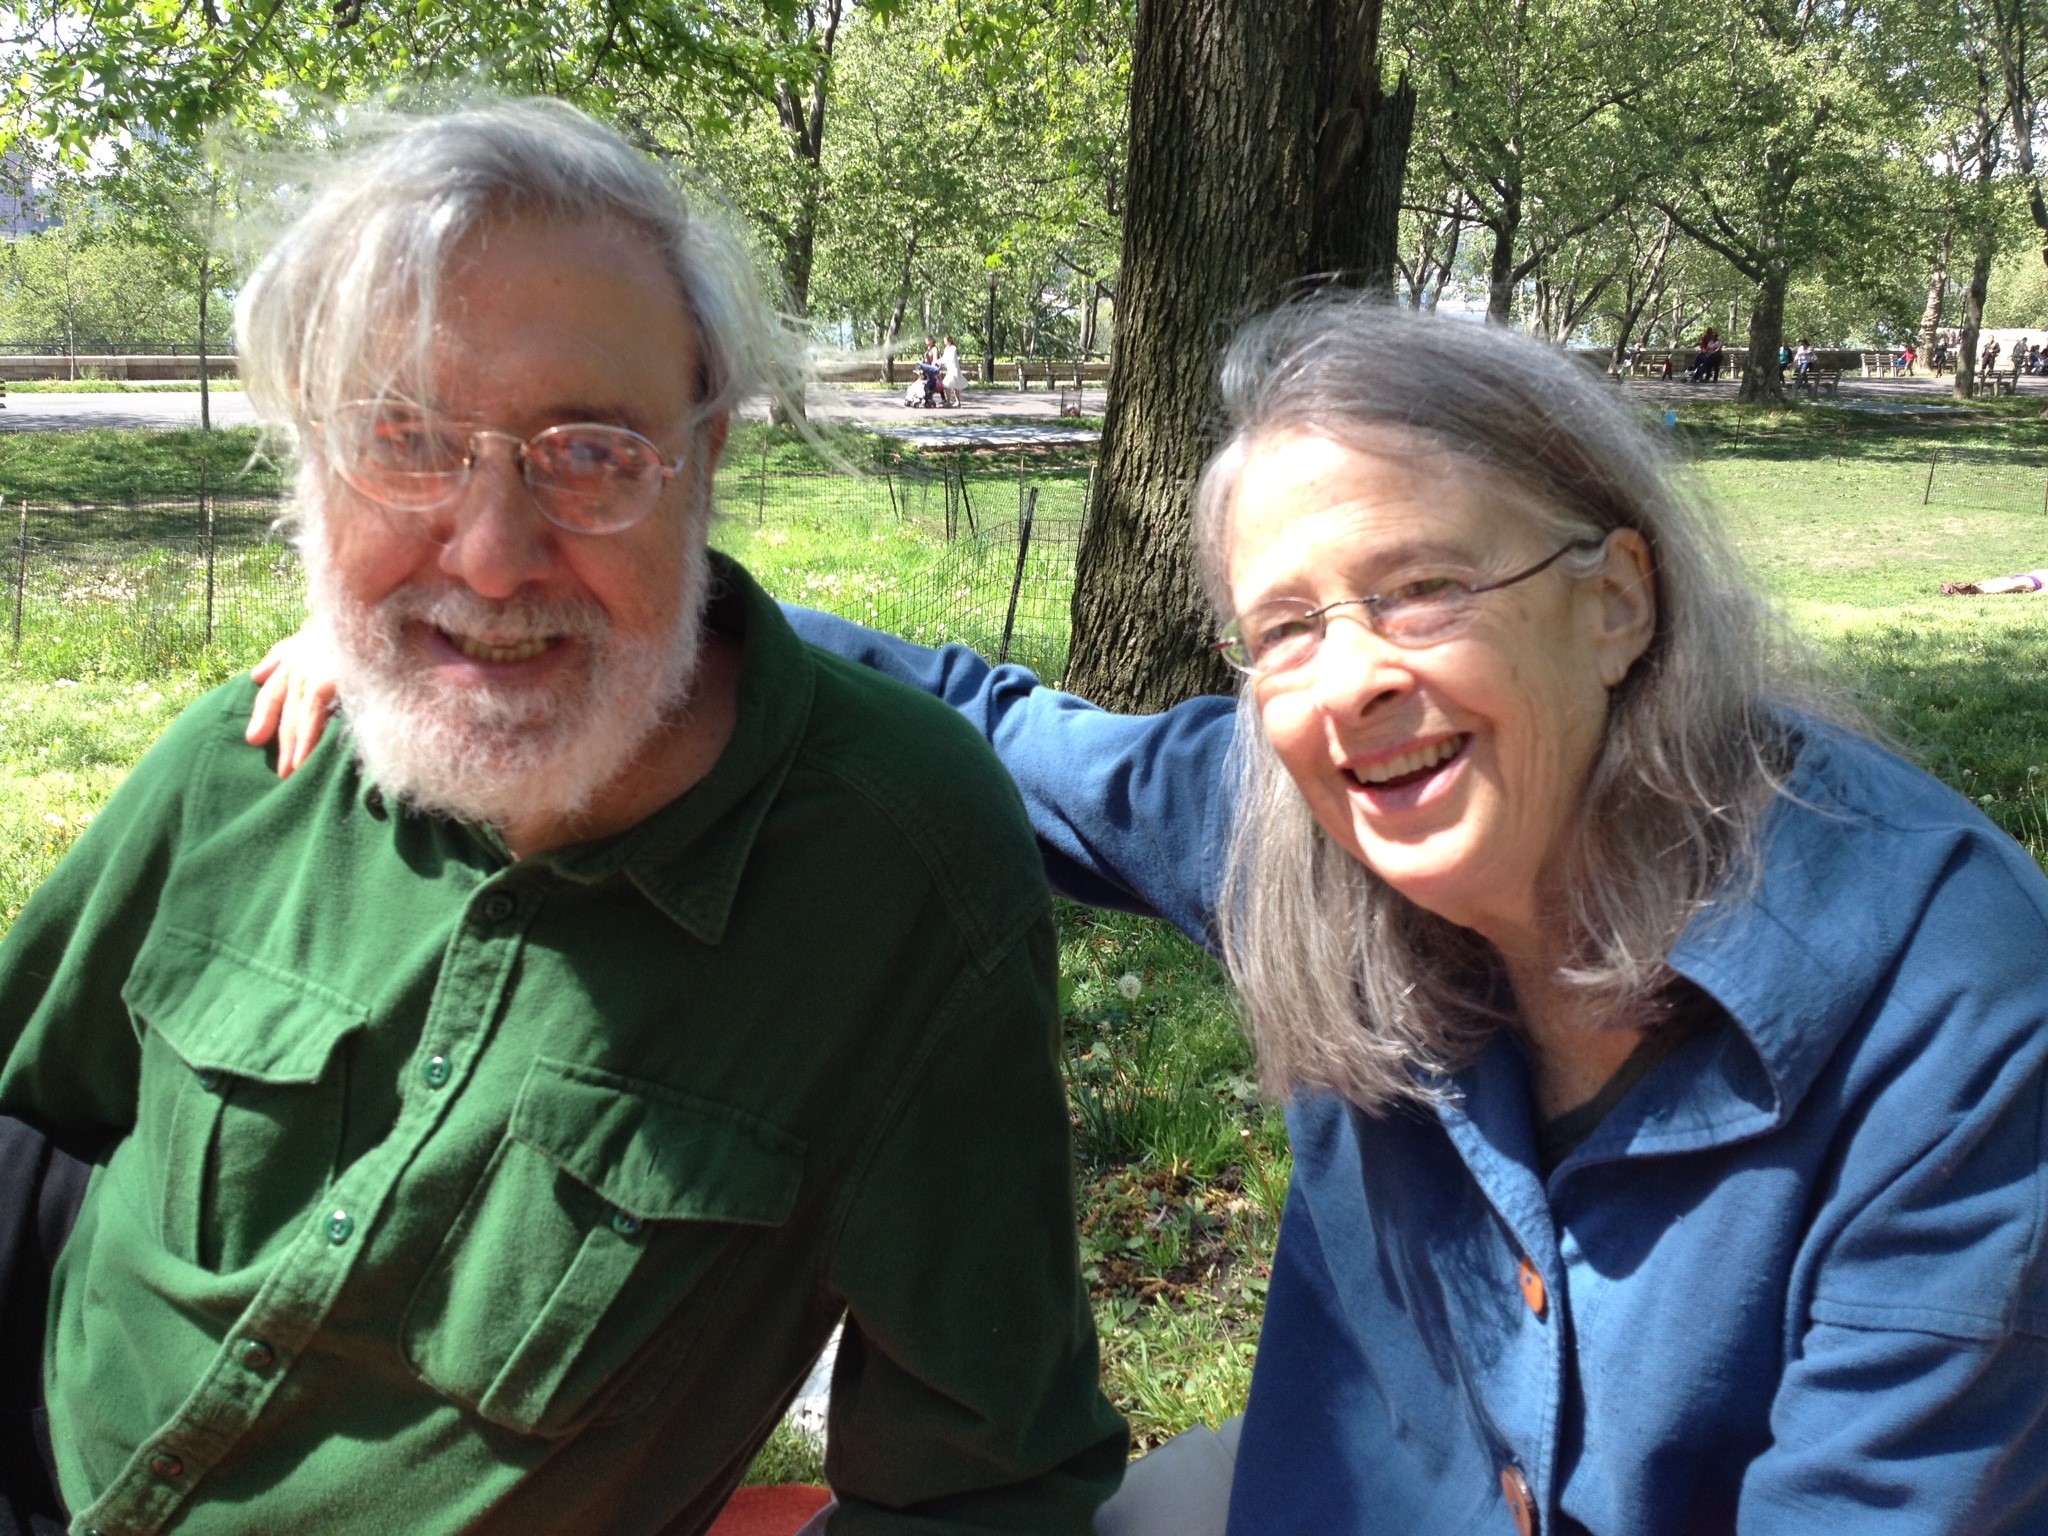 Joel Gressel and Eleanor Cory on a bench in a park.